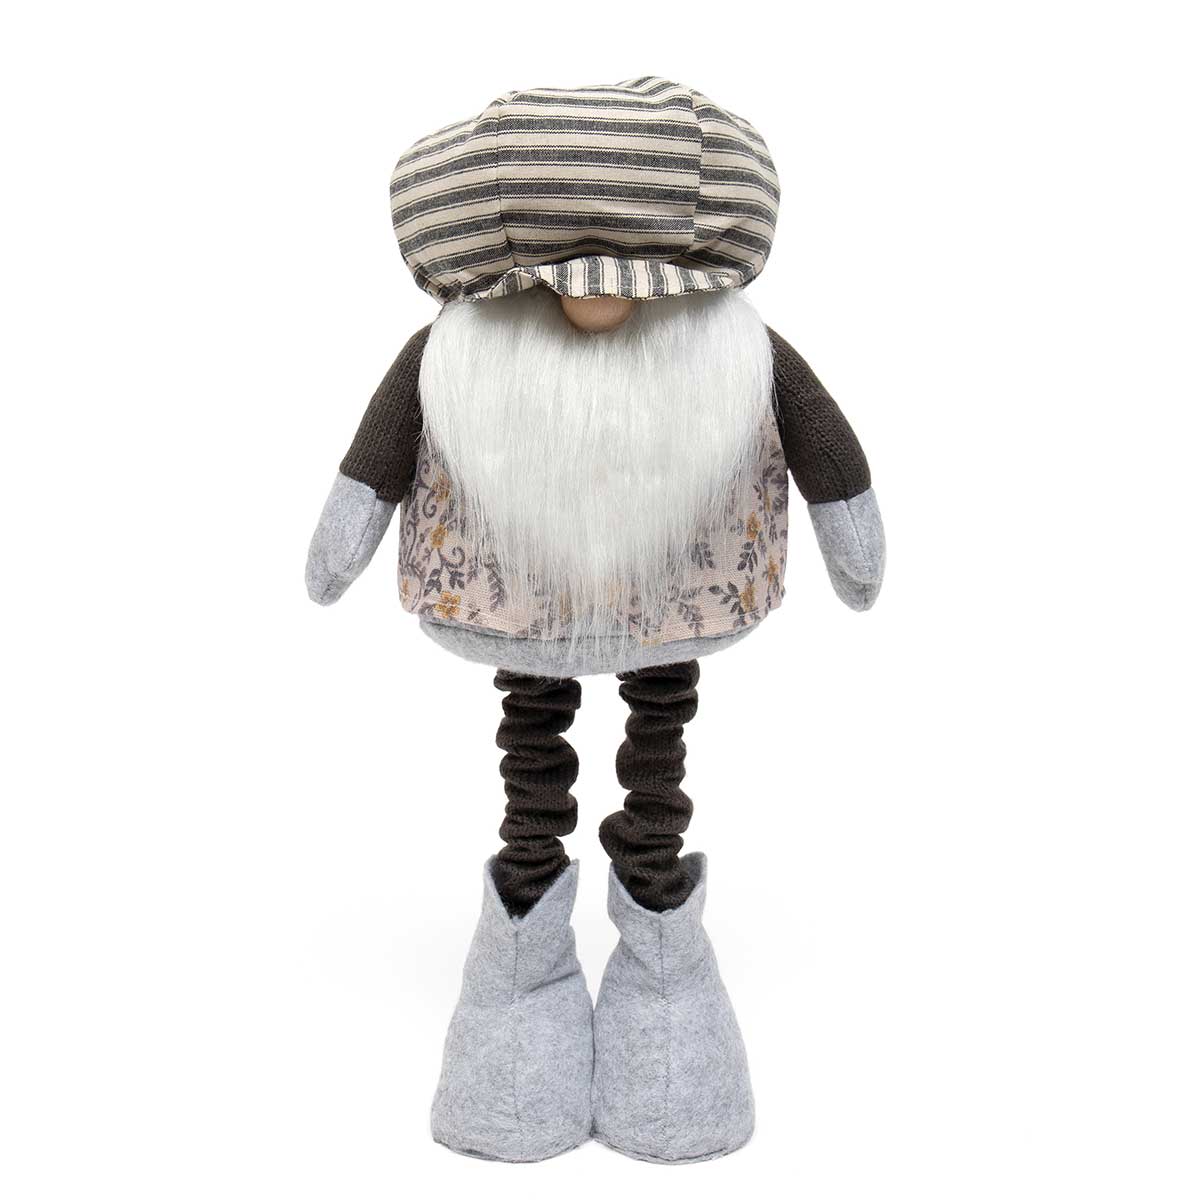 b50 Mr. Dandy Gnome with Metal Expandable Legs